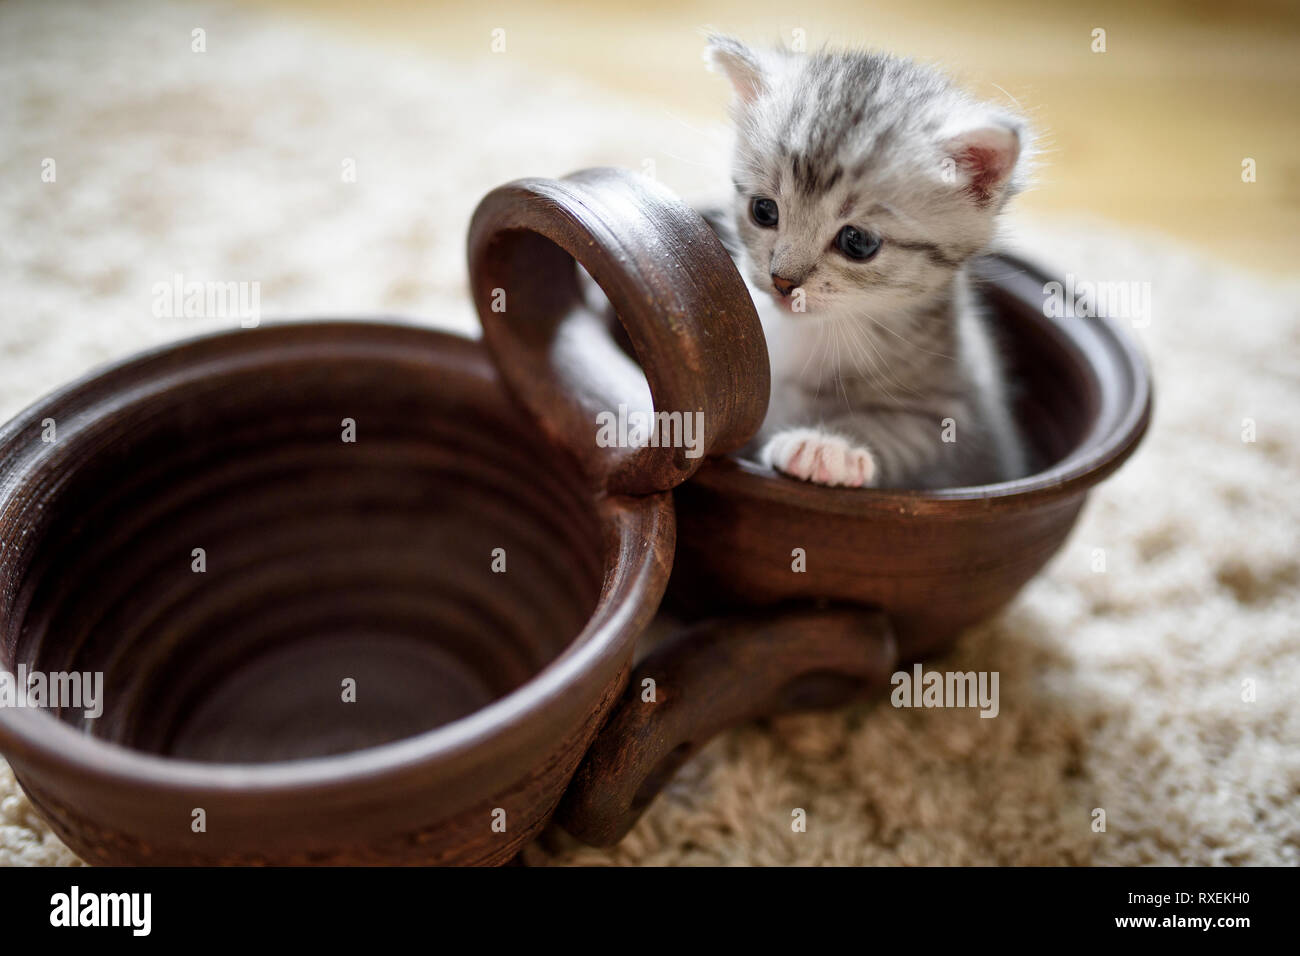 Cute small white grey cat sitting in empty brown pot. Stock Photo